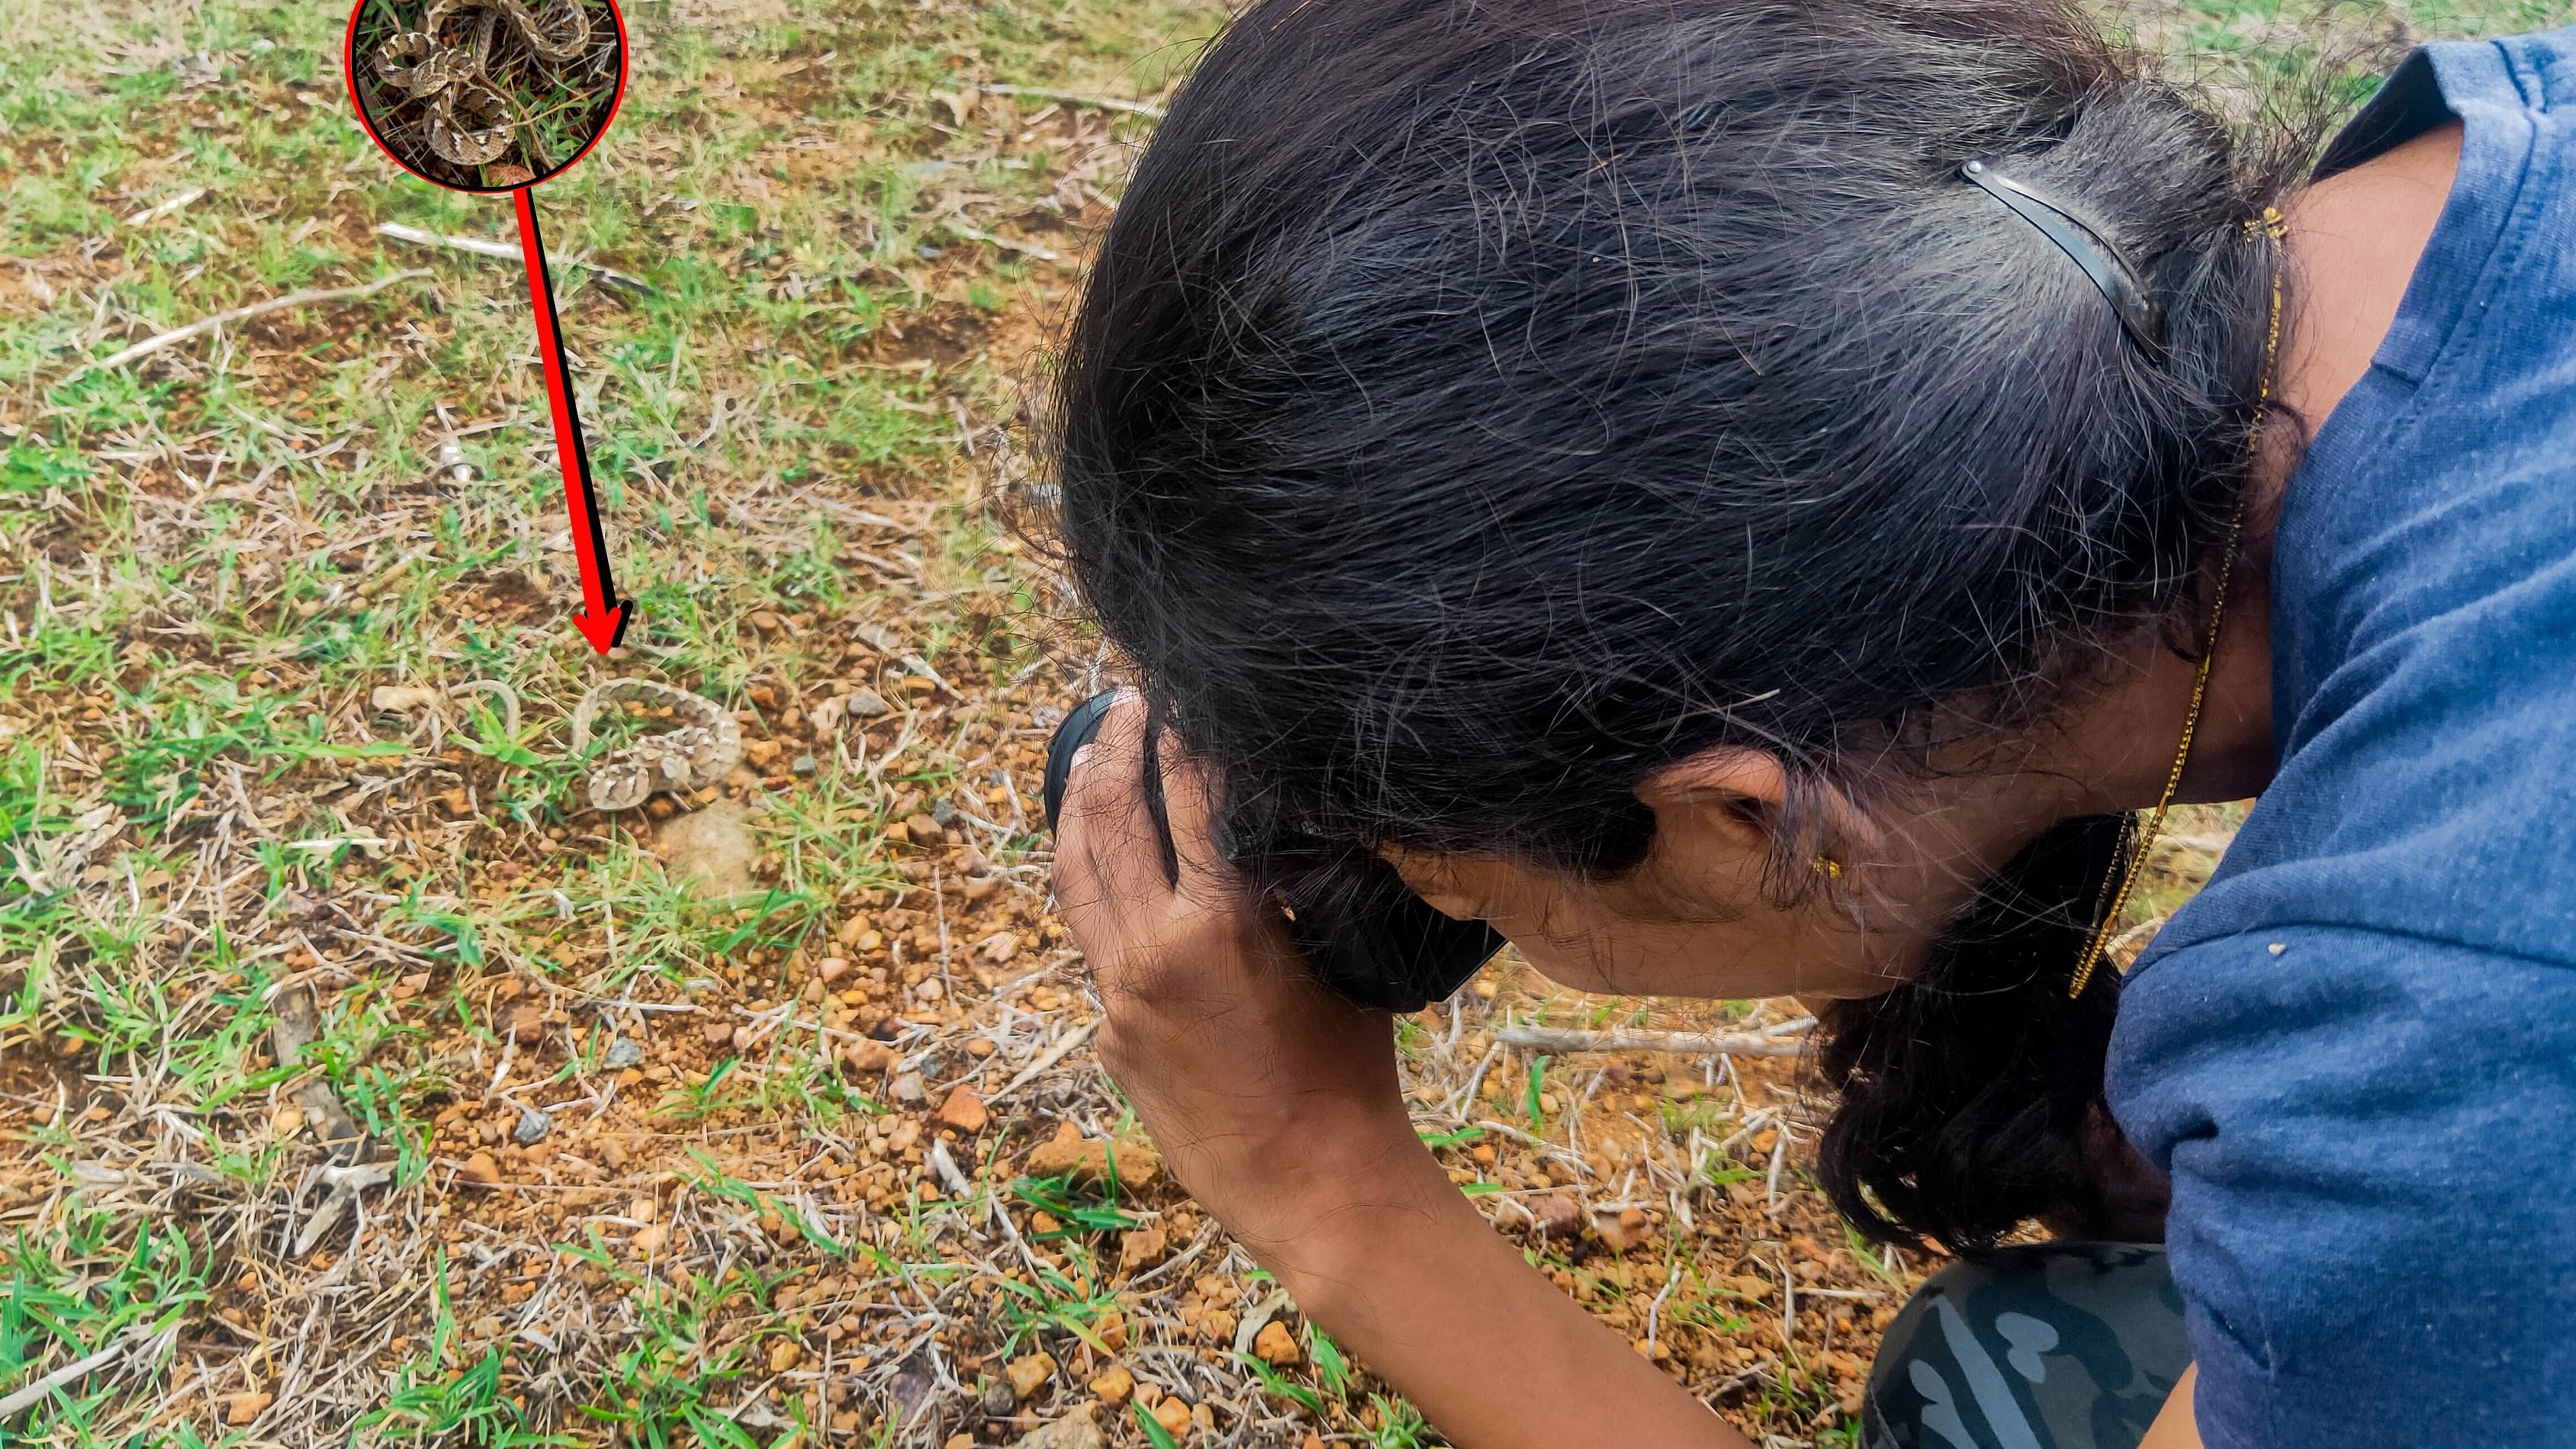 A herper spots and photographs a common cat snake in Sirsi.